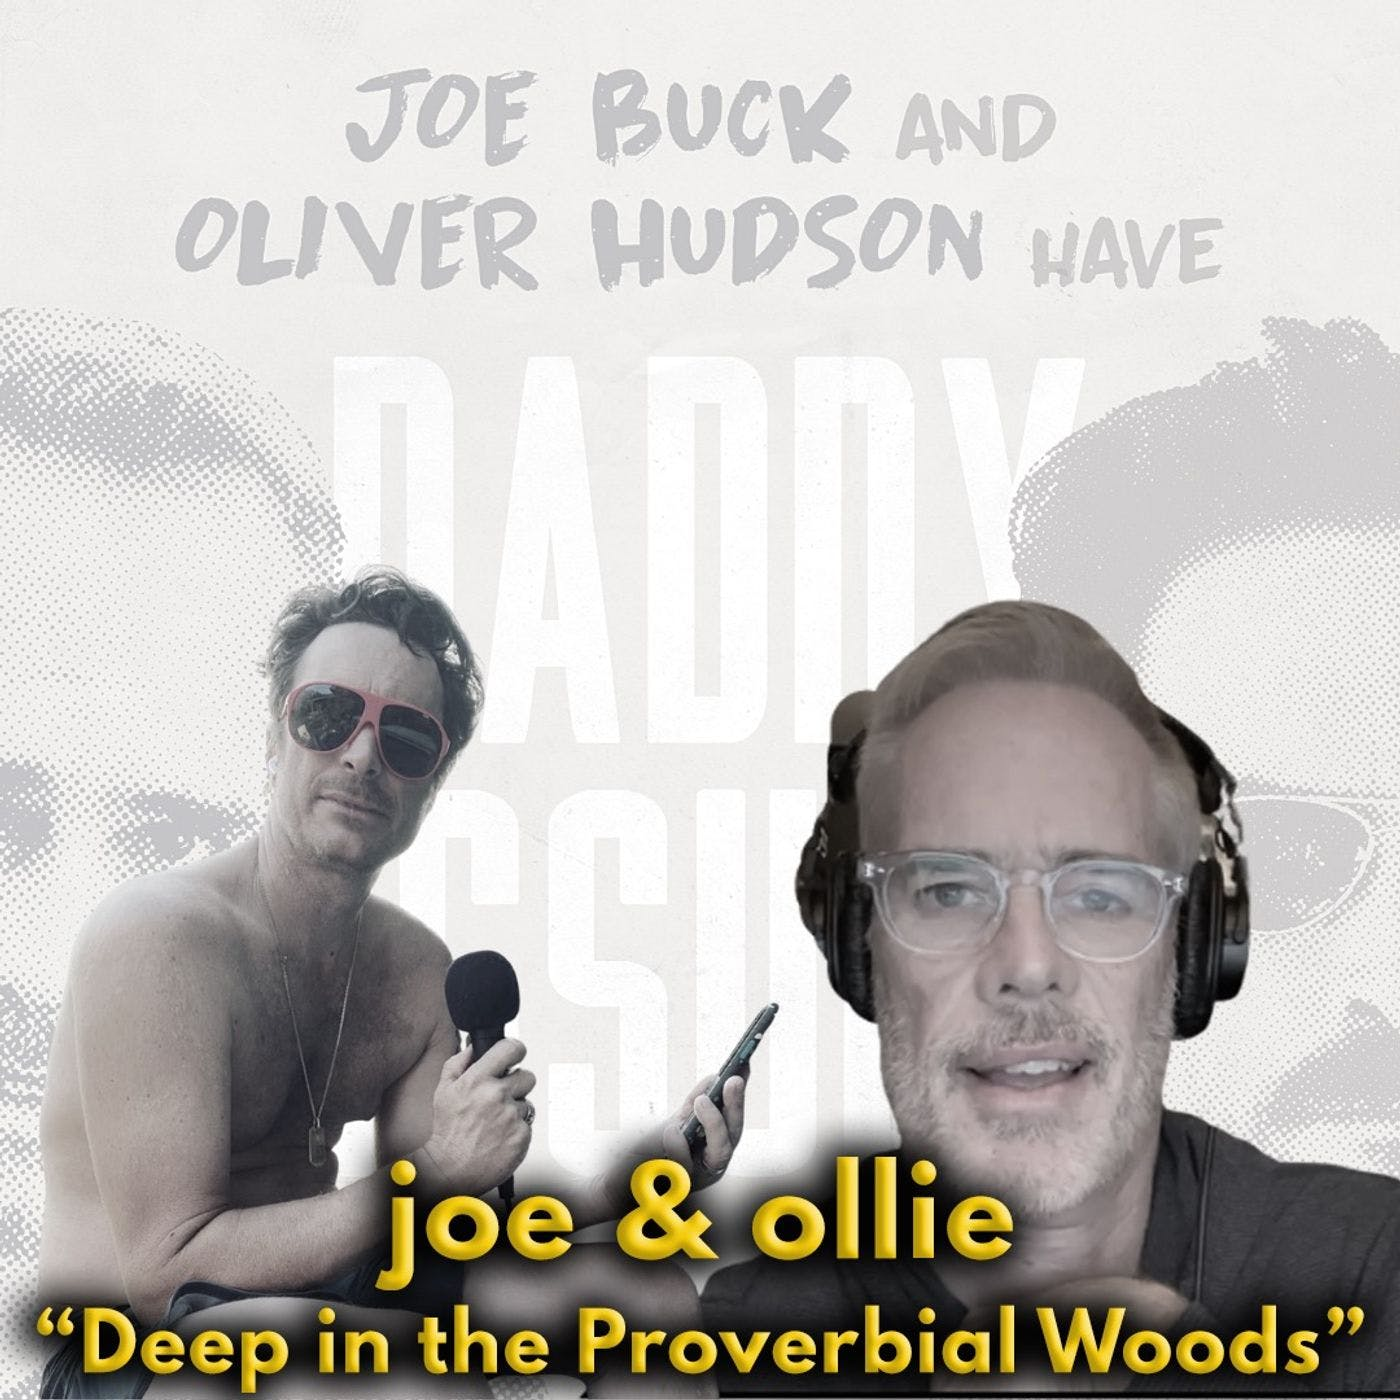 Joe and Oliver: Deep in the Proverbial Woods